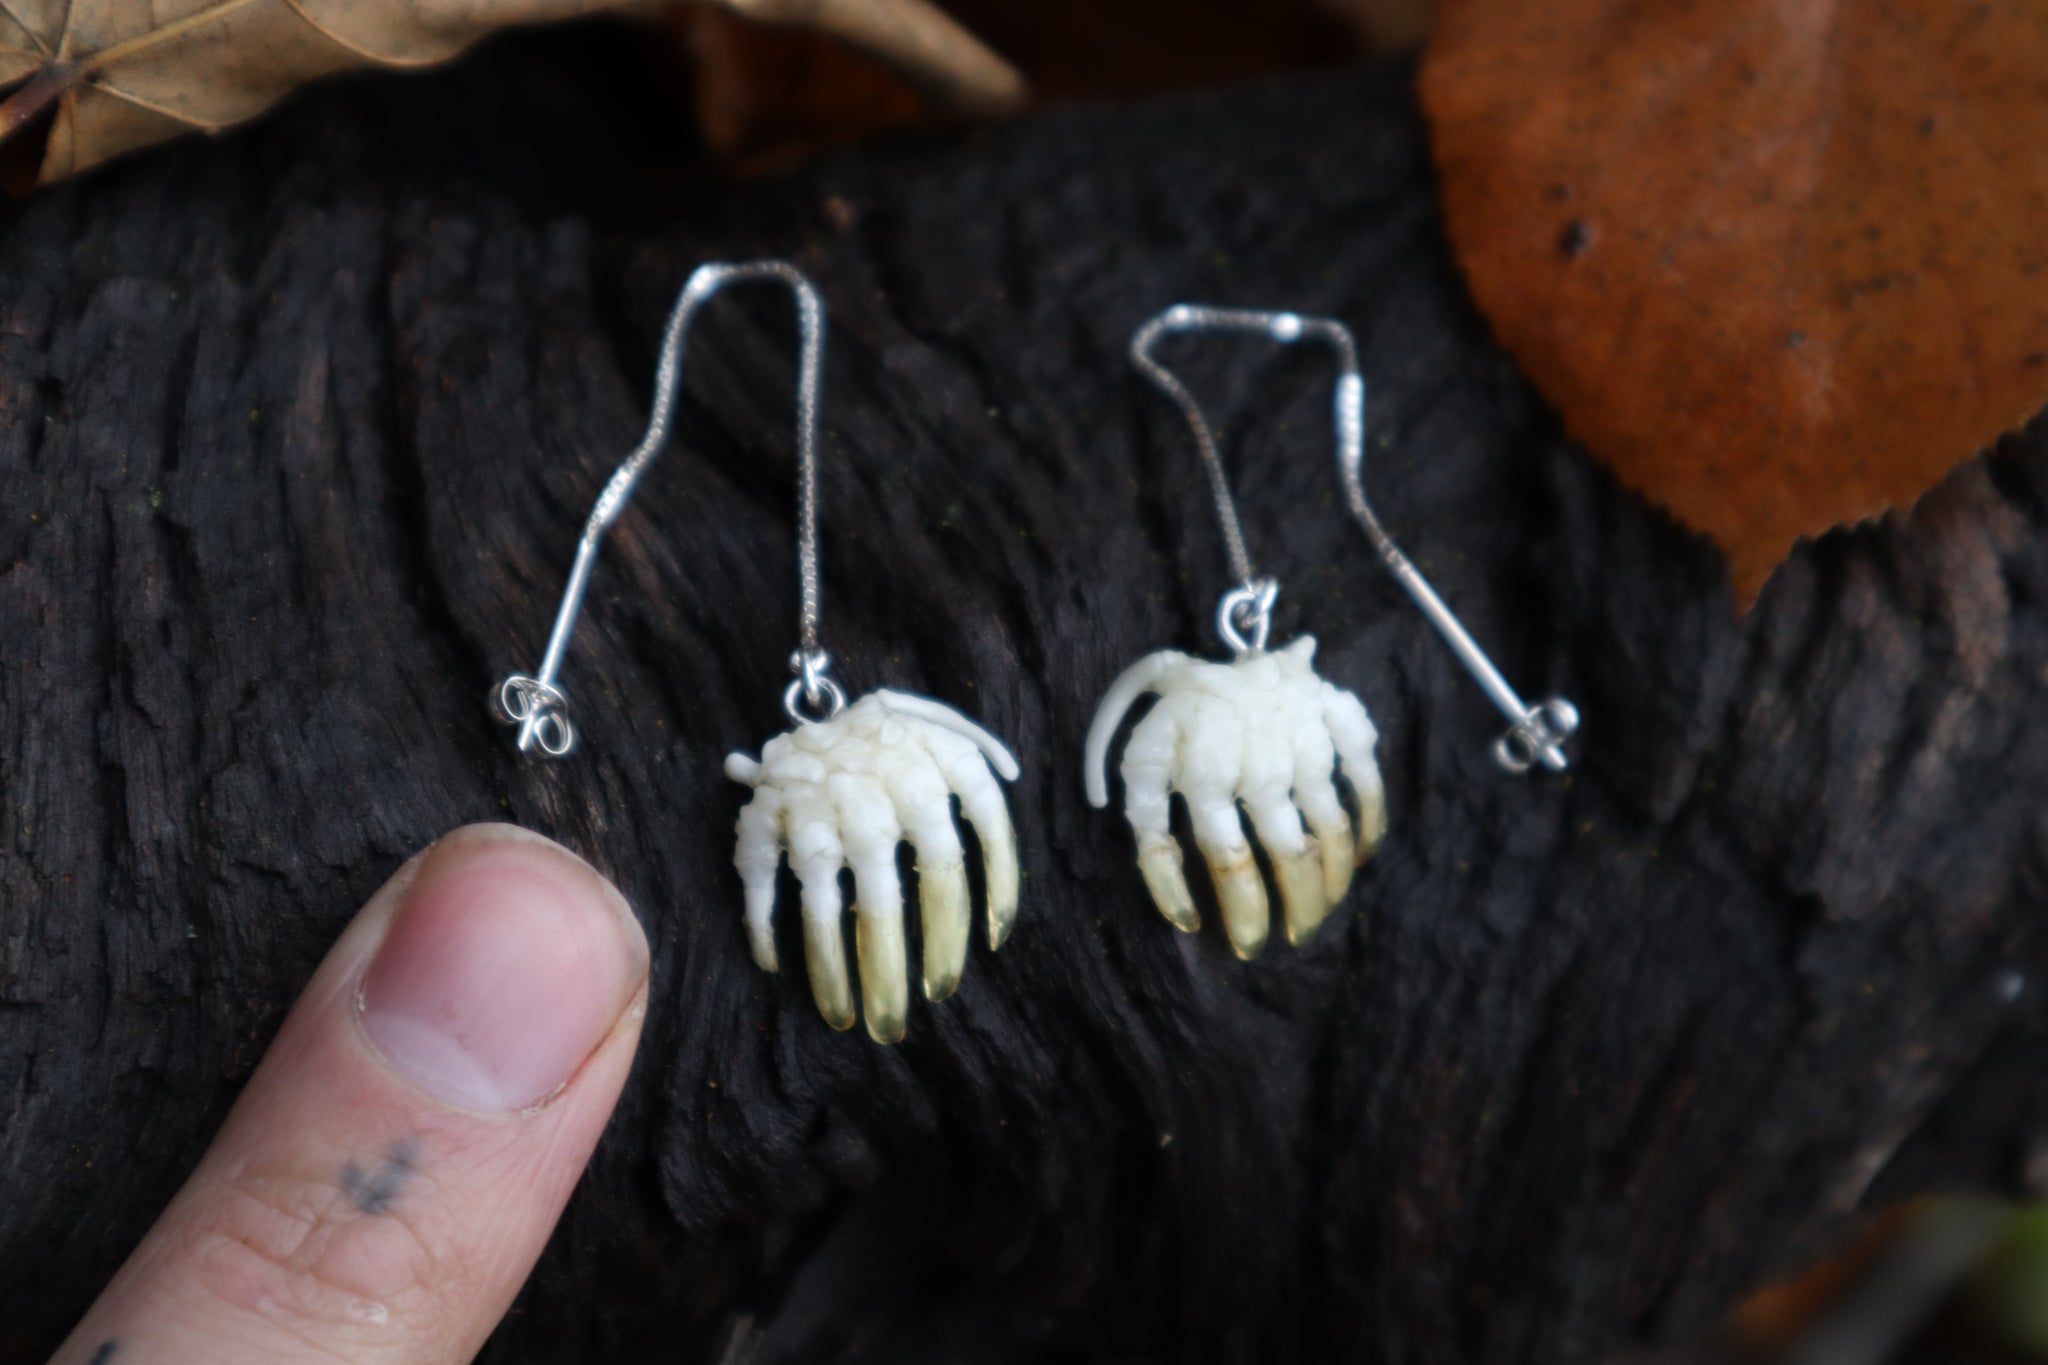 Articulated Mole Paw Earrings - .925 Silver